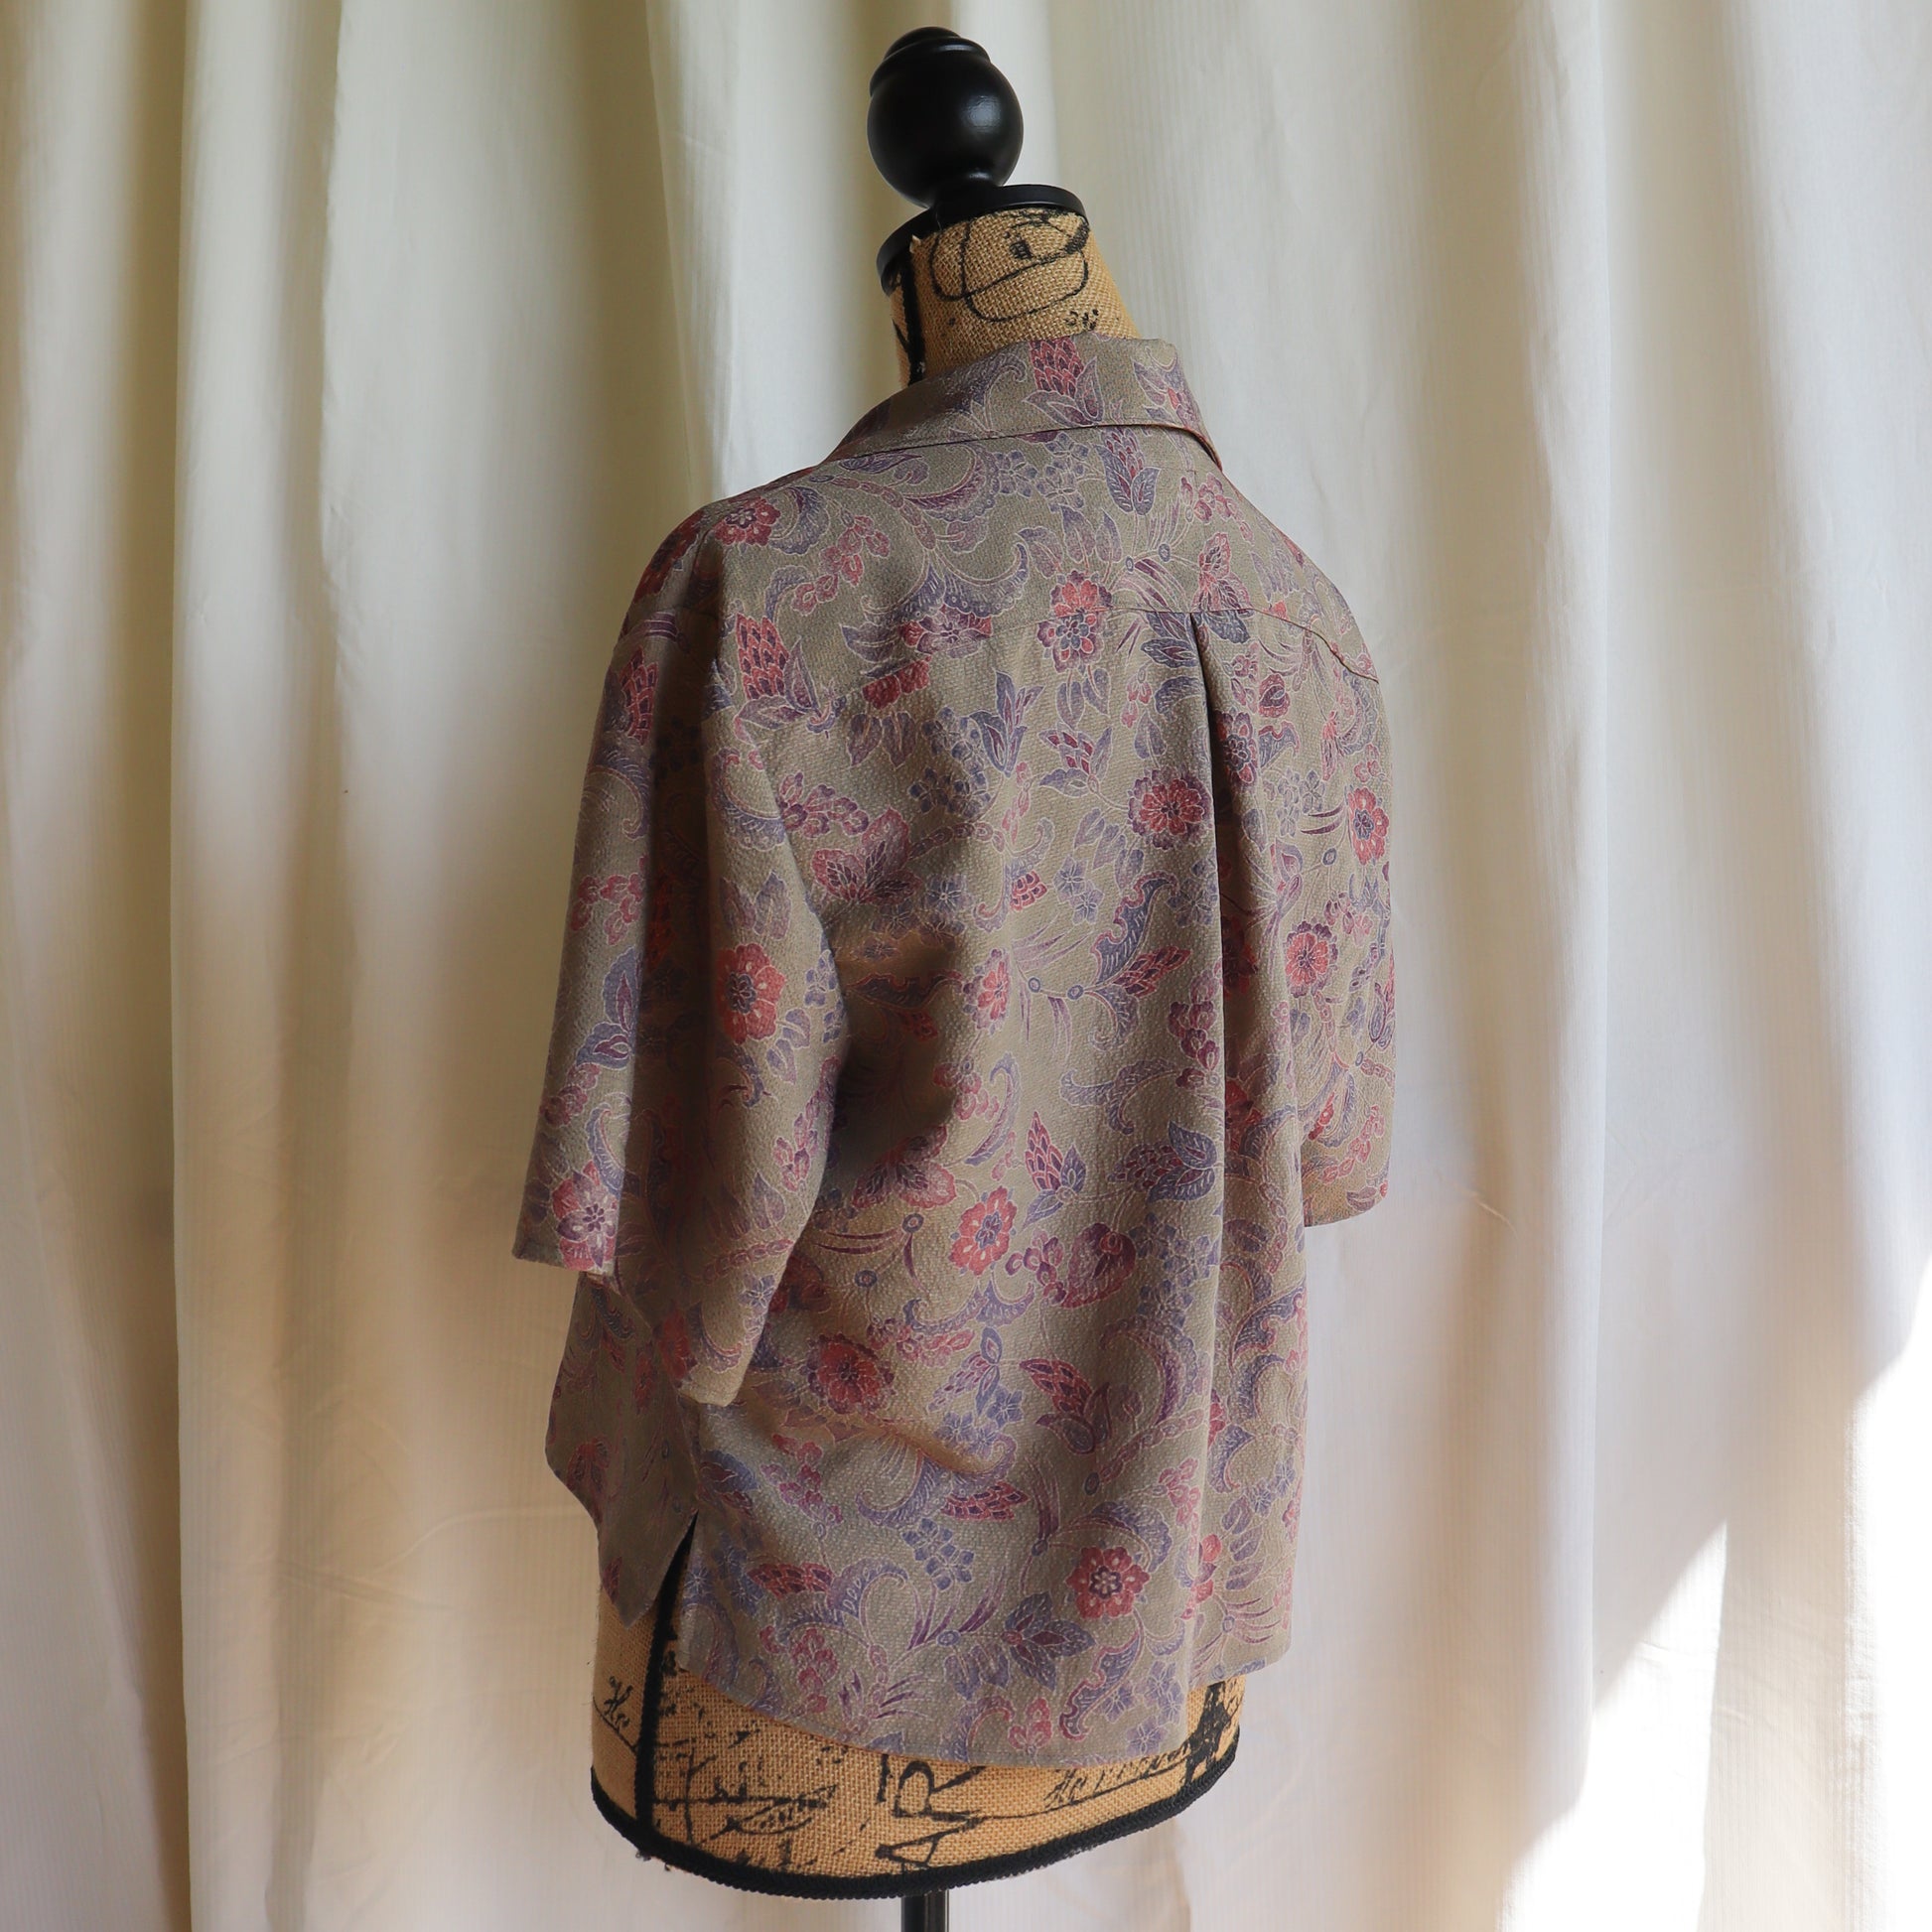 Front tie shirt upcycled from vintage silk kimono.